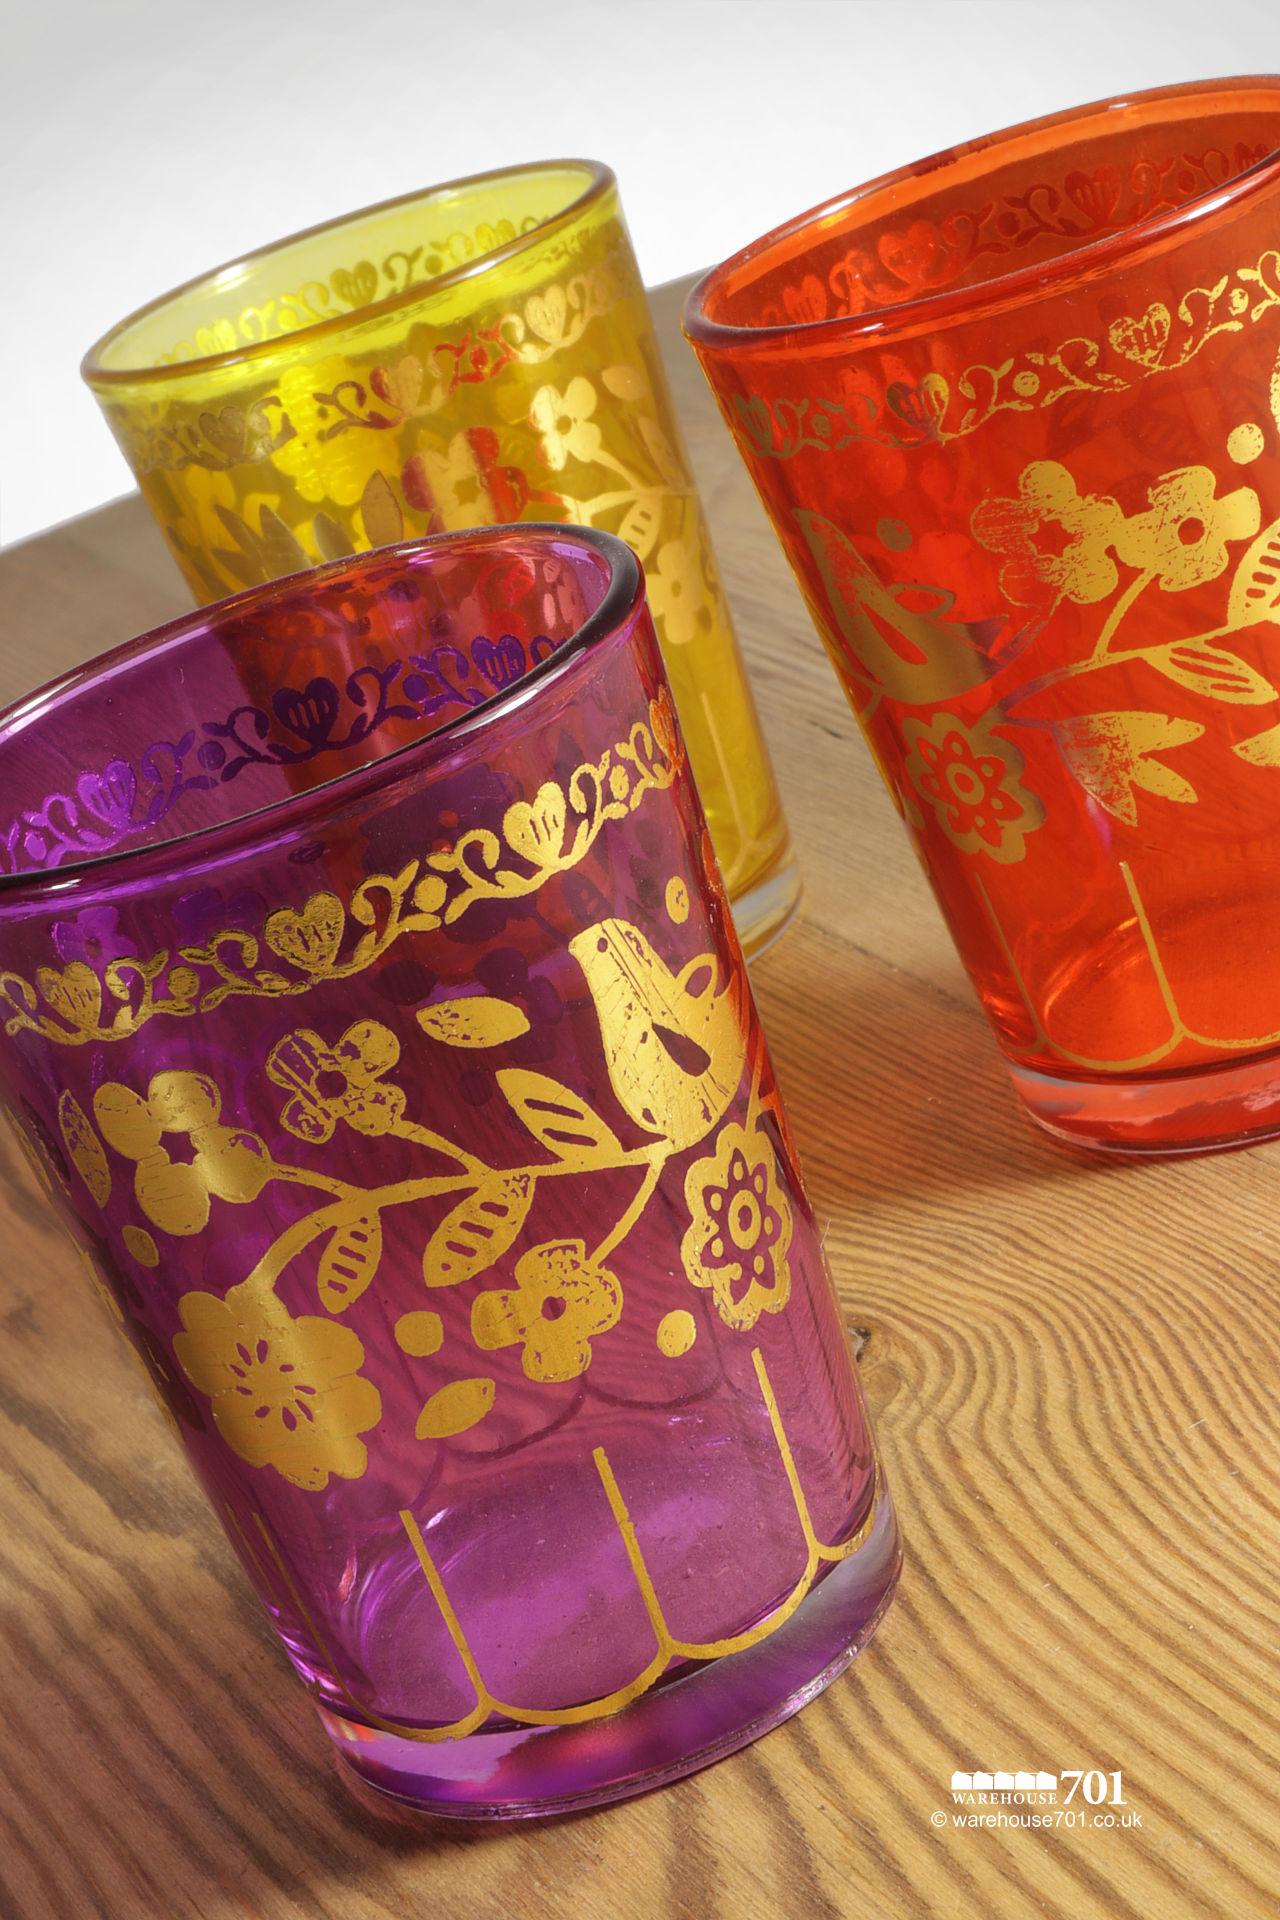 Colourful Gilded Effect Candle Light Glasses or Holders #2